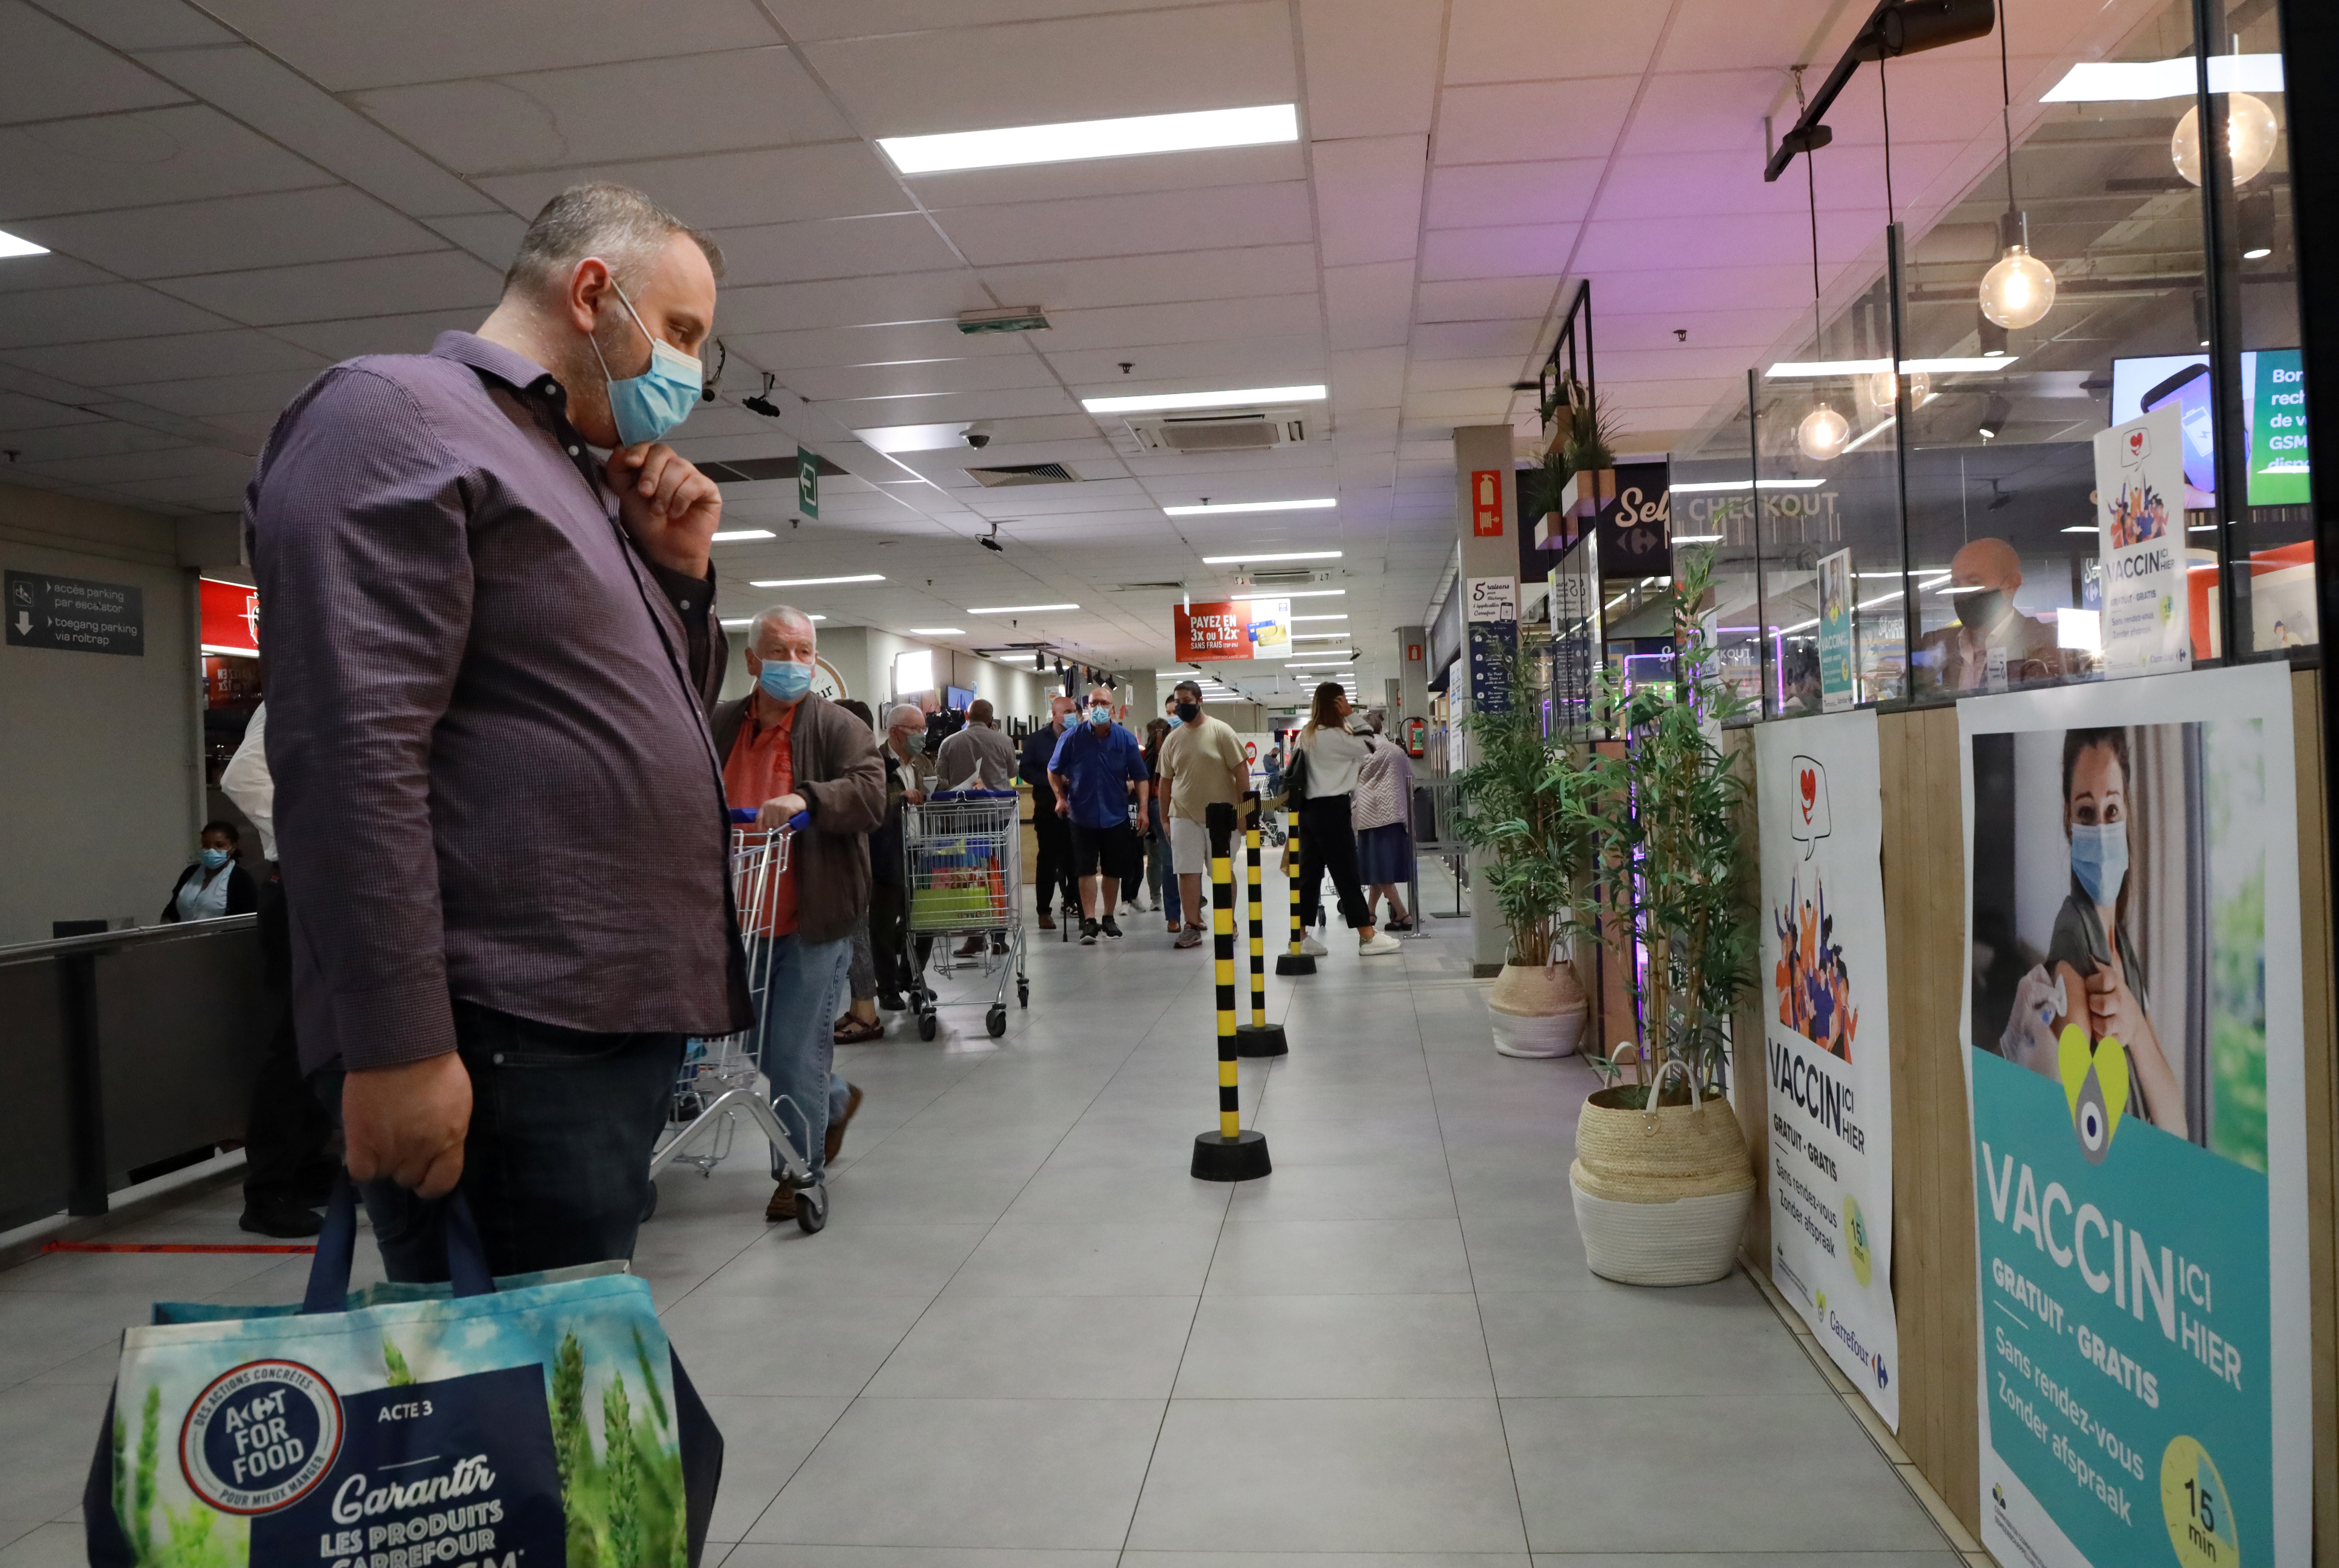 A shopper, wearing a protective face masks, looks at a poster for a coronavirus disease (COVID-19) vaccination centre installed inside a supermarket in Brussels, Belgium, August 30, 2021. REUTERS/Bart Biesemans